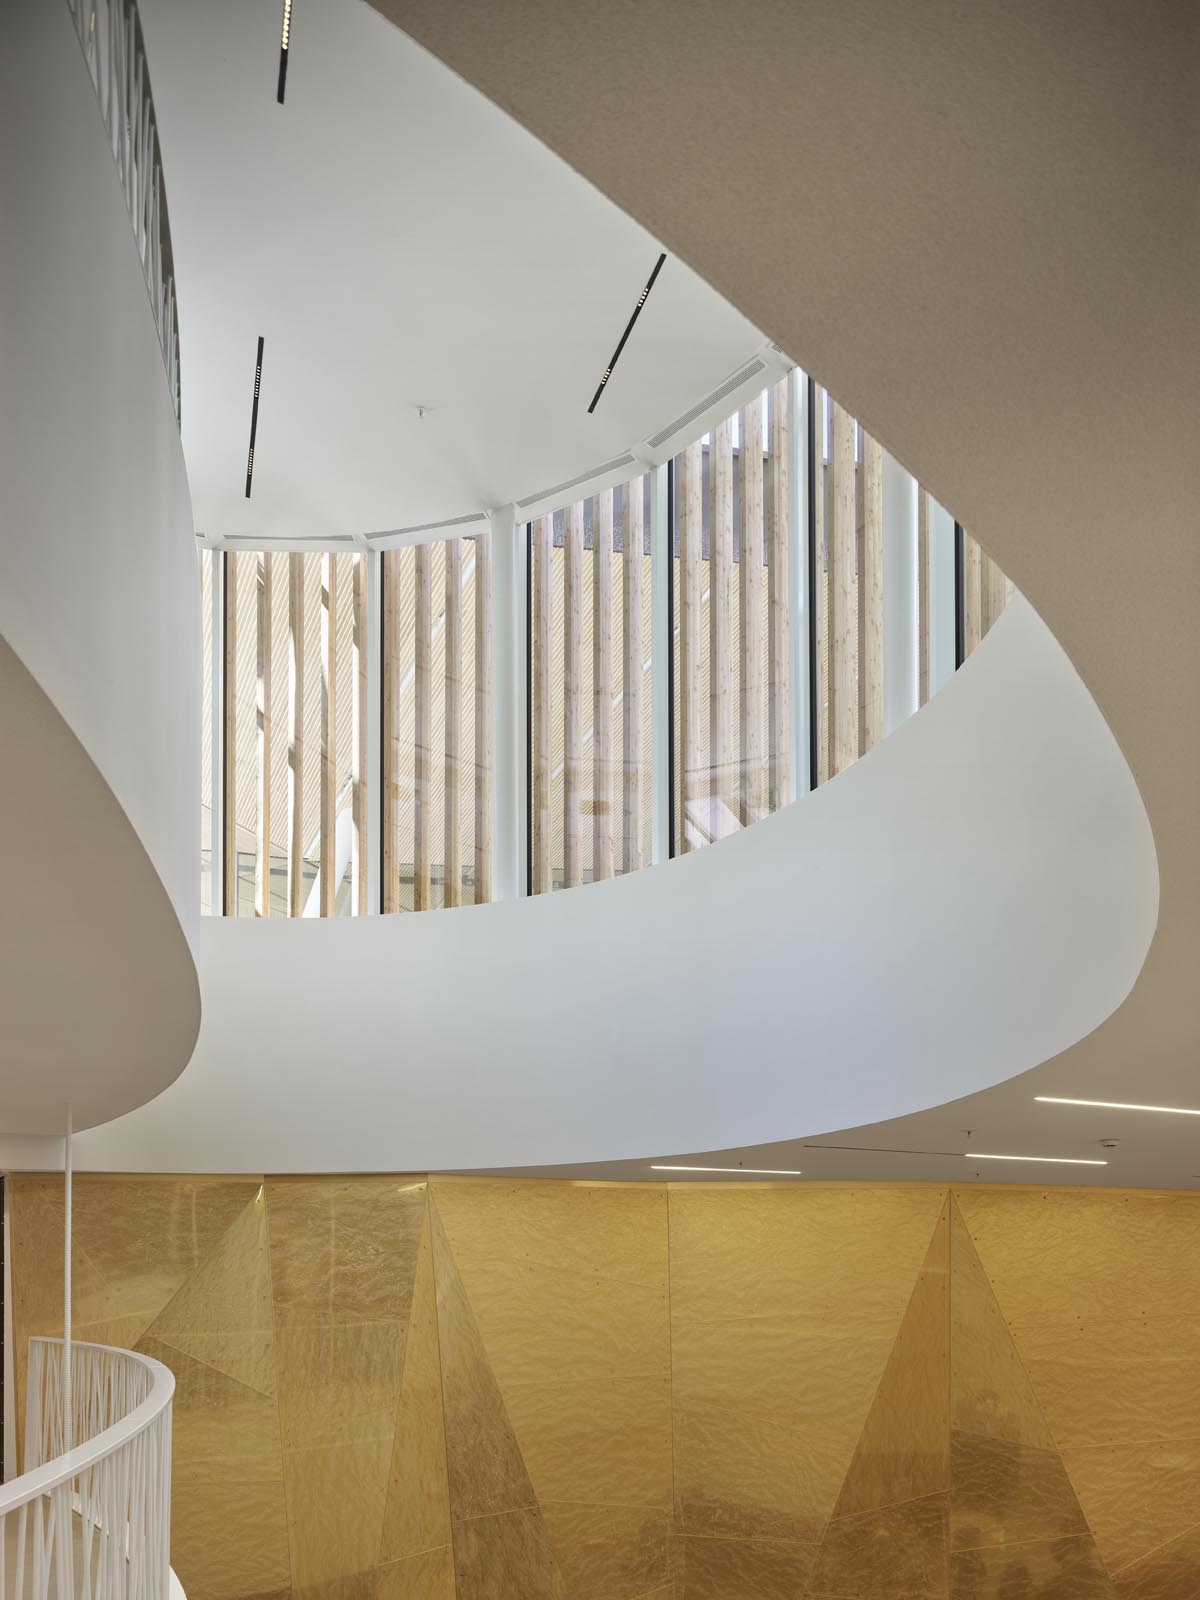 Stairwell interior of contemporary building flooded with light